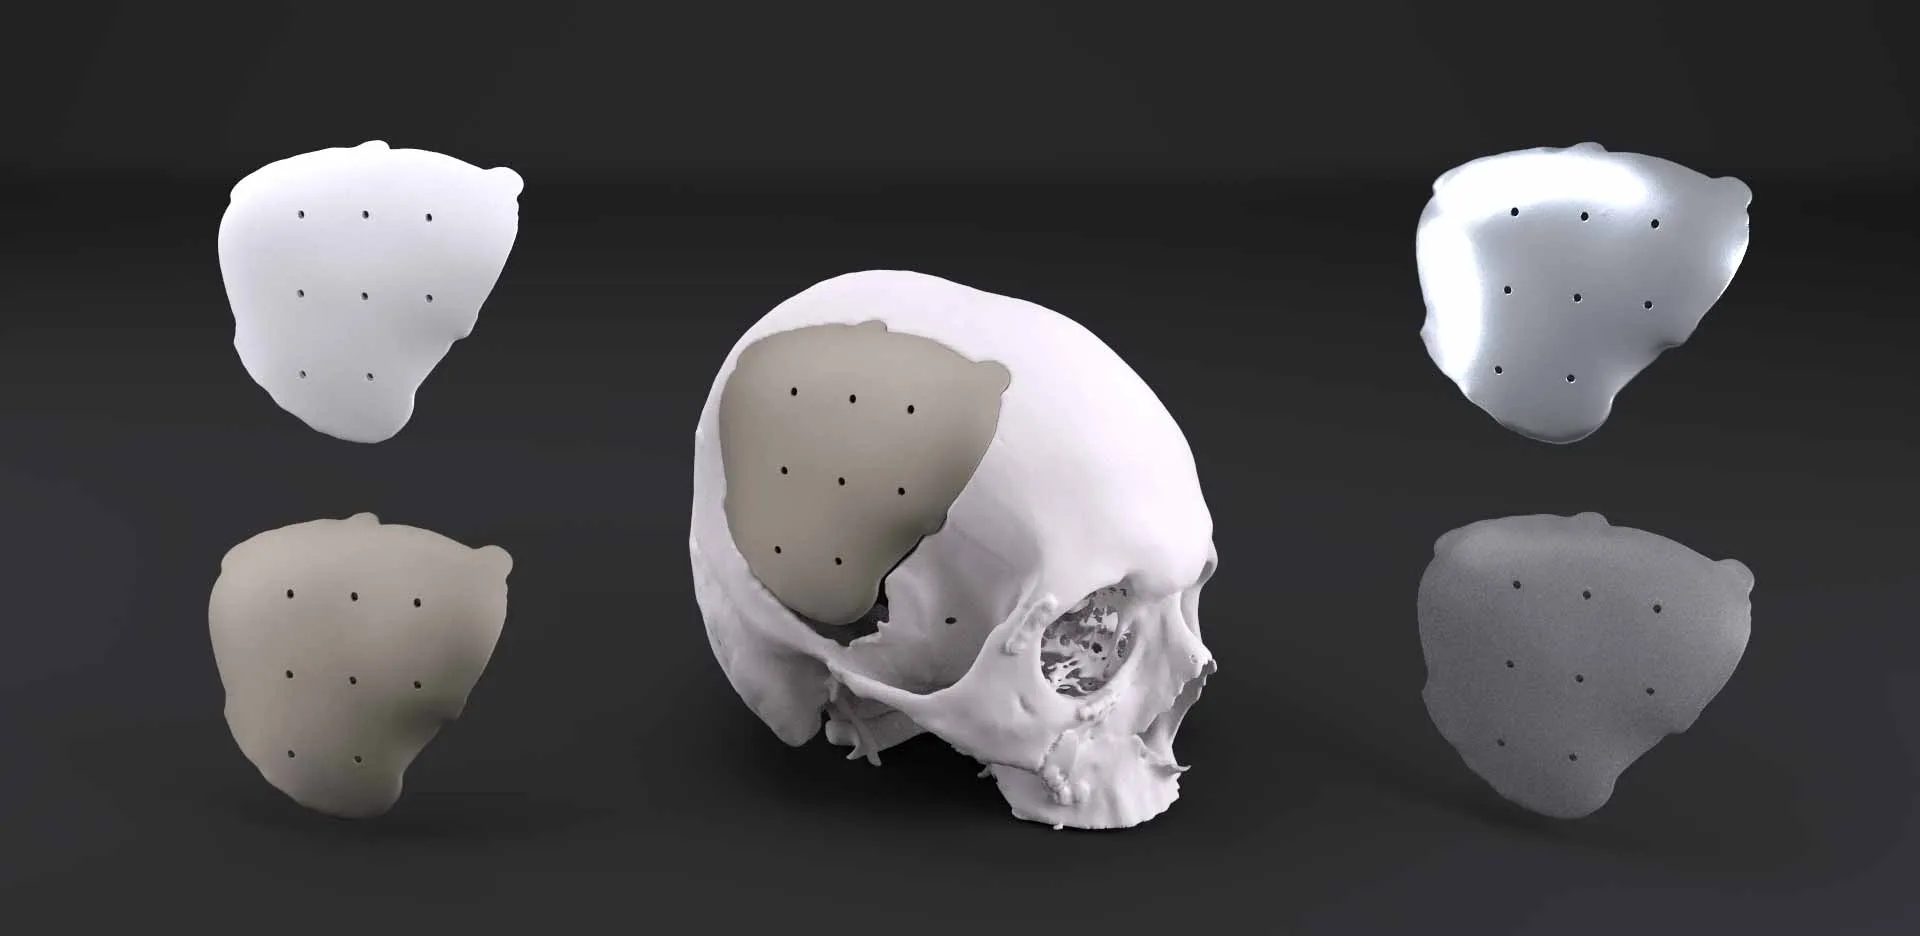 Analysis of PMMA 3DP Implants Aesthetics and Strengths